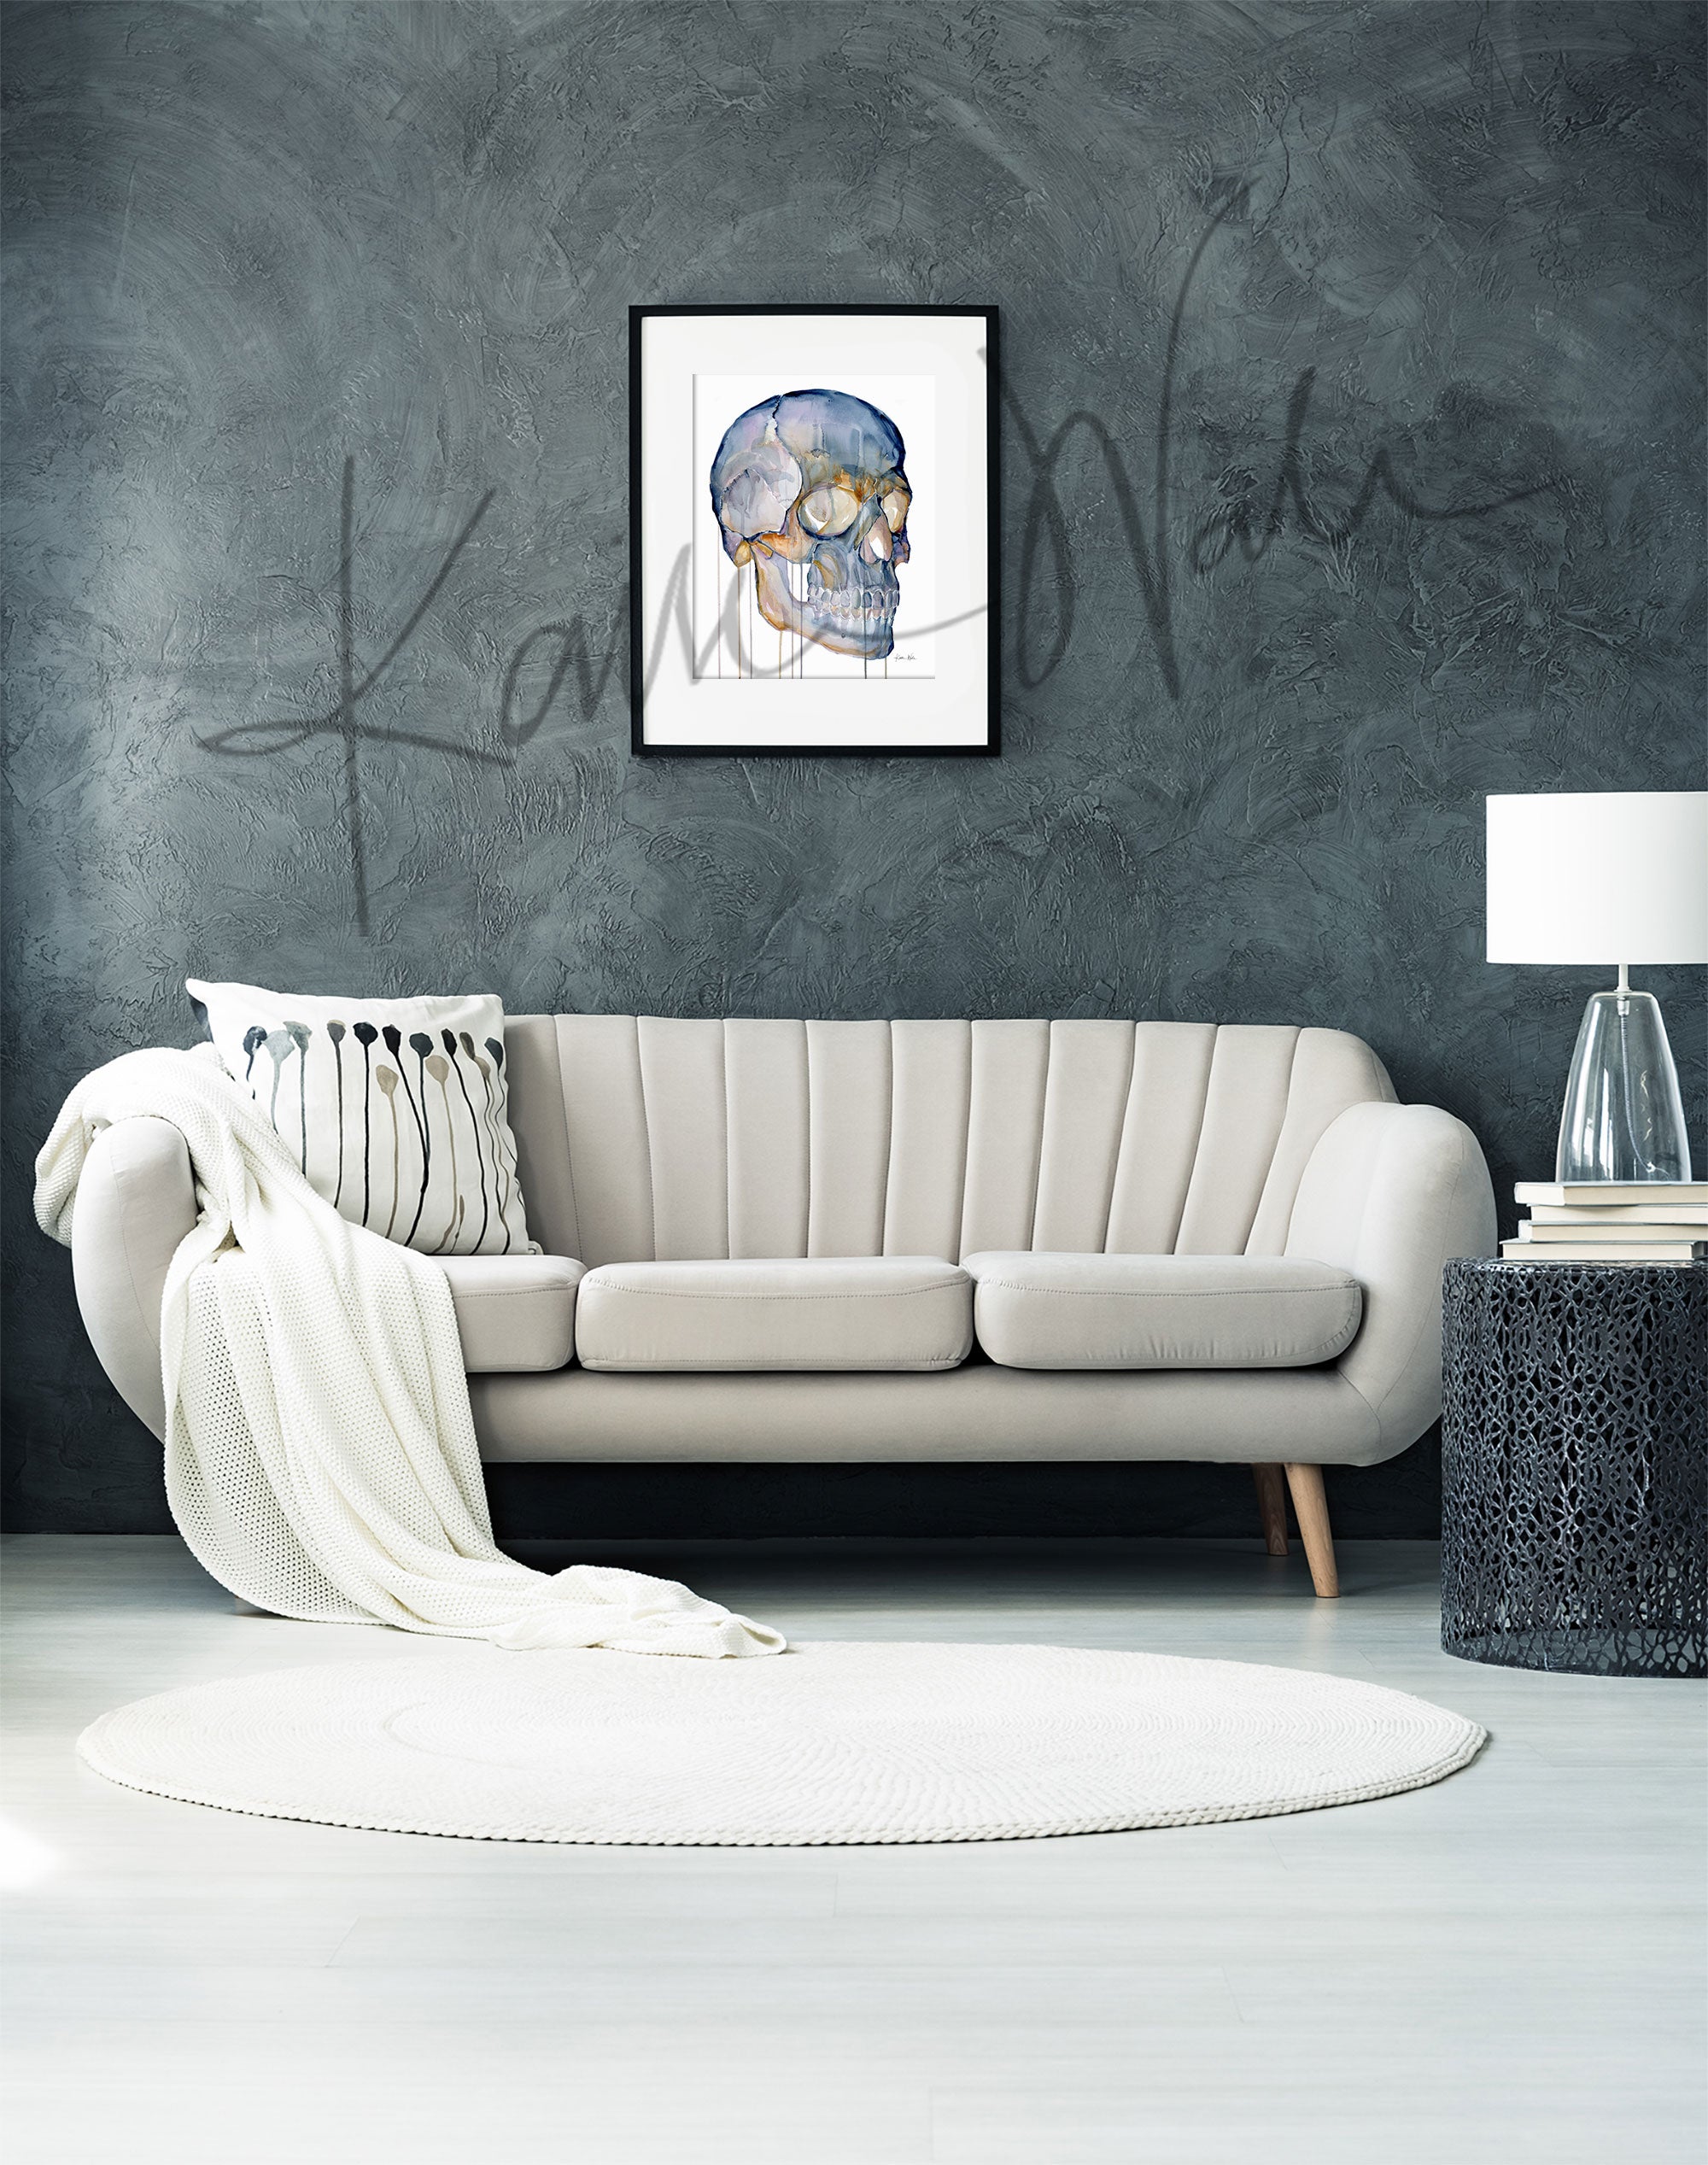 Framed watercolor painting of a skull from a three quarter view. The painting is hanging over a white couch.